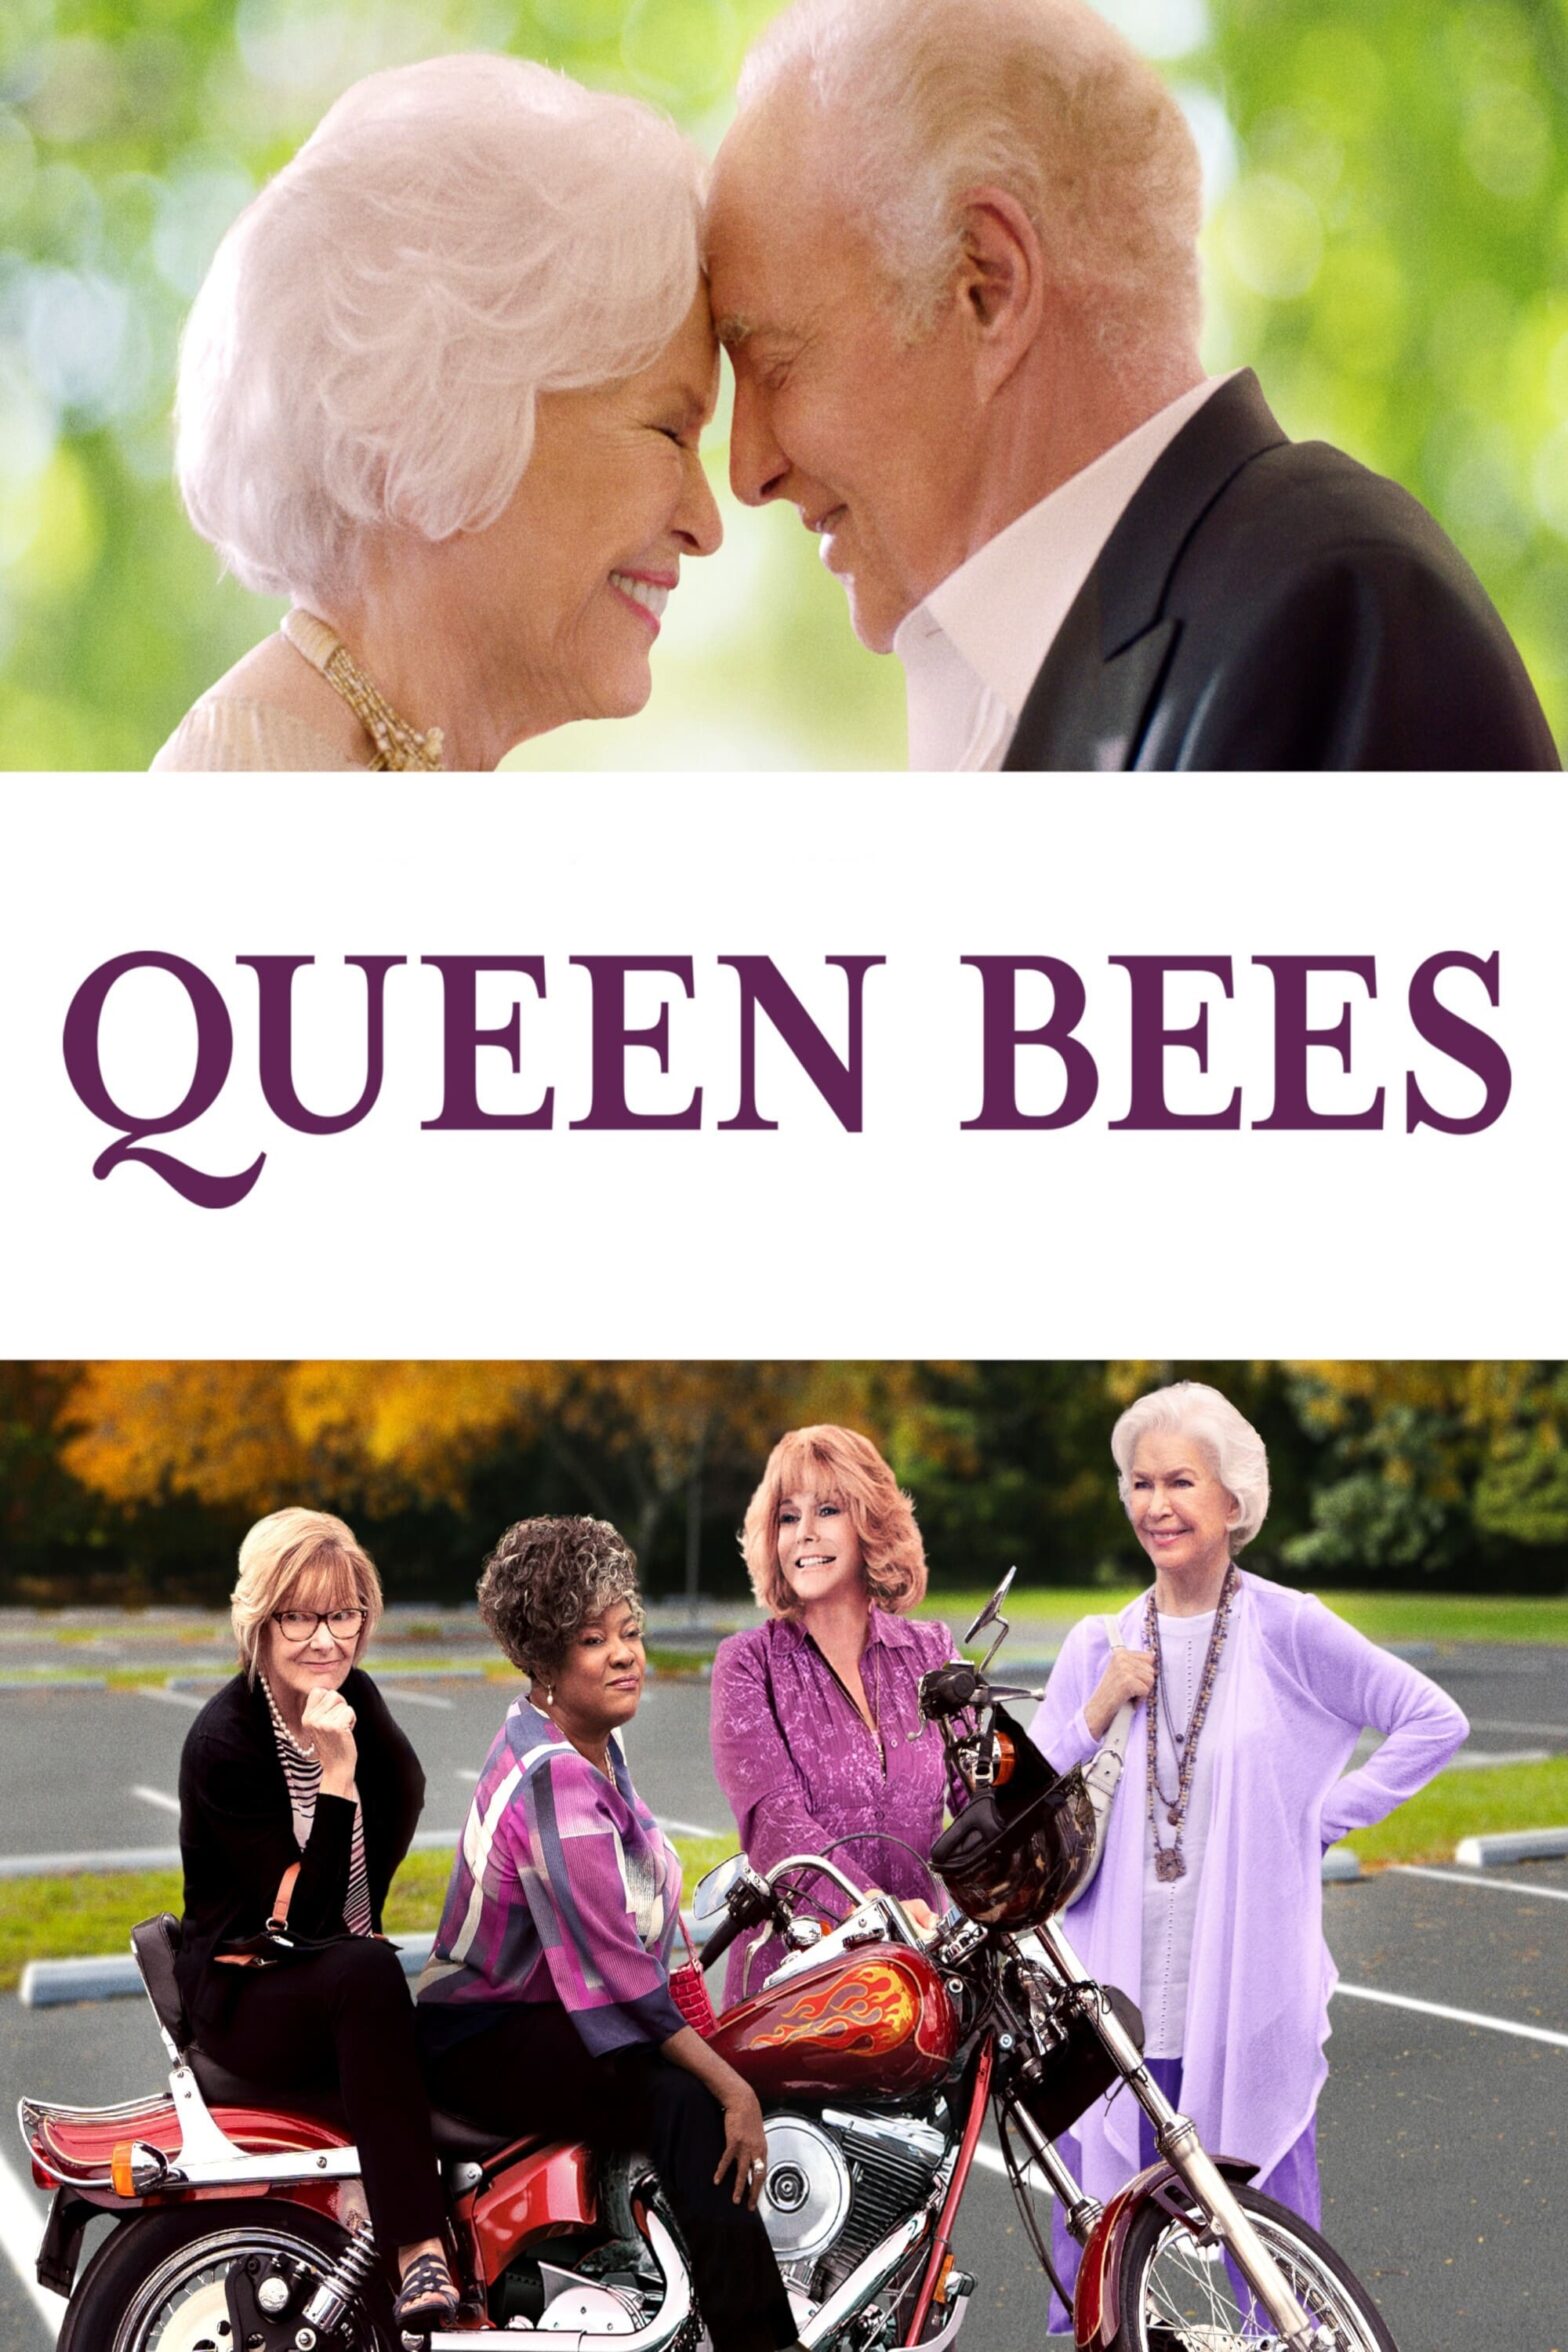 Poster for the movie "Queen Bees"